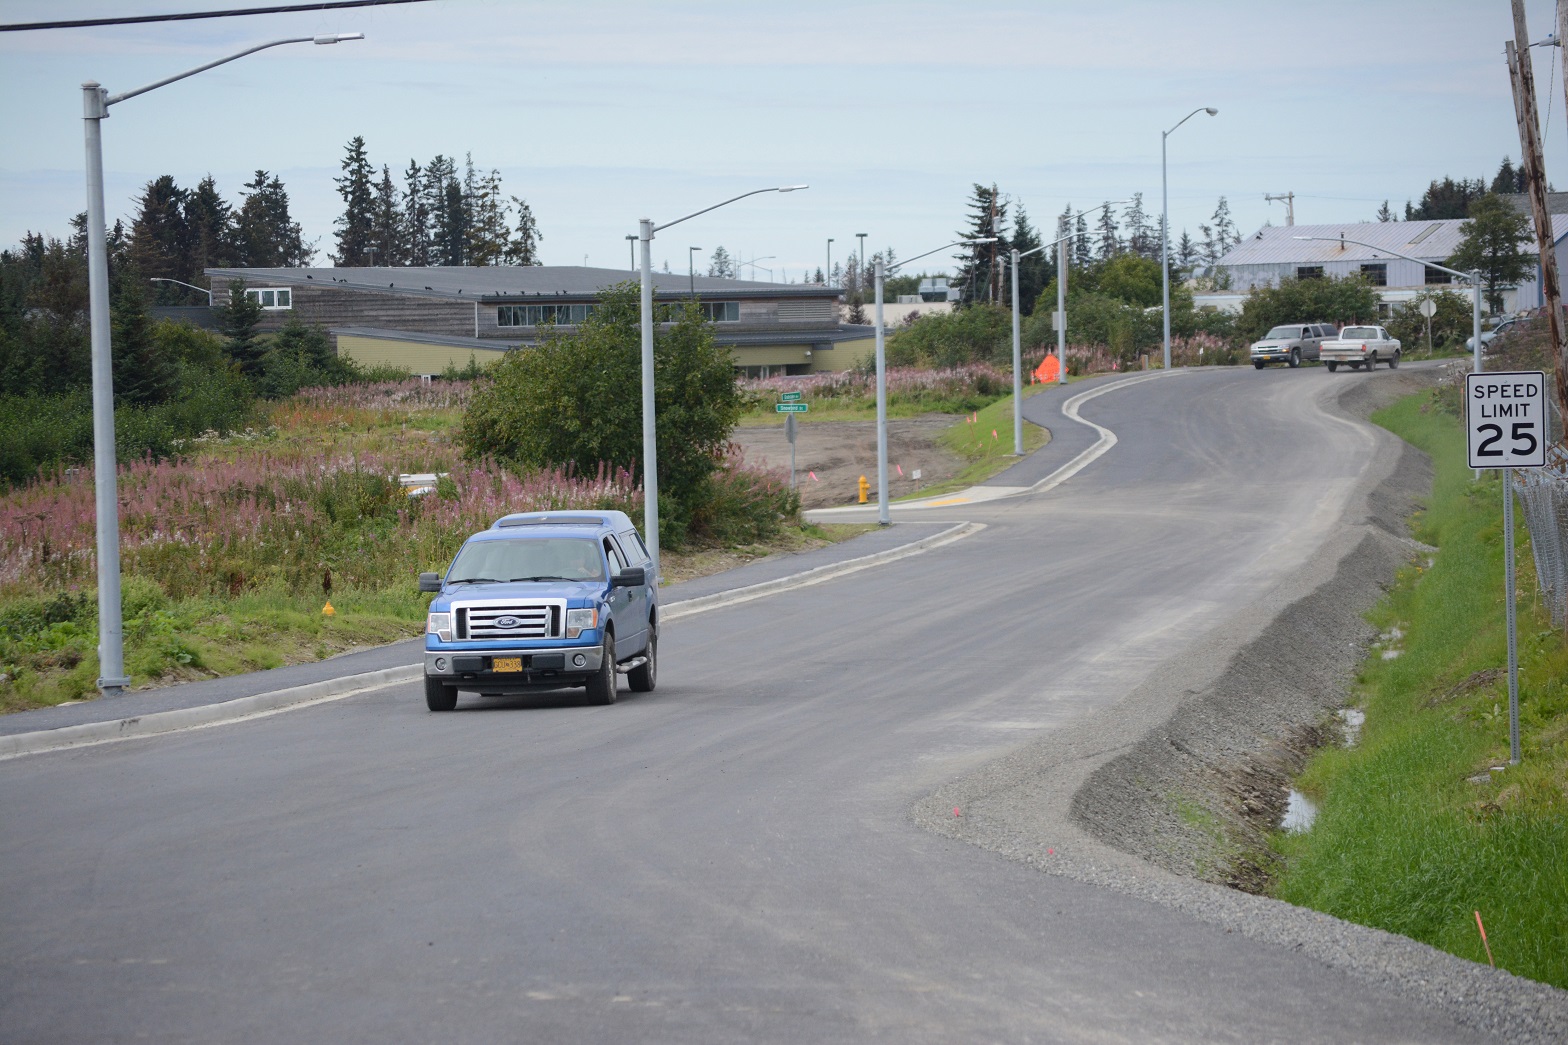 Cars move down a new extension of Grubstake Avenue and Snowbird Street on Aug. 16. Grubstake now connects Heath Street and Lake Street and Snowbird Street - formerly Waddell Way - connects Grubstake Avenue to the Homer Post Office and the Sterling Highway.-Photo by Michael Armstrong, Homer News